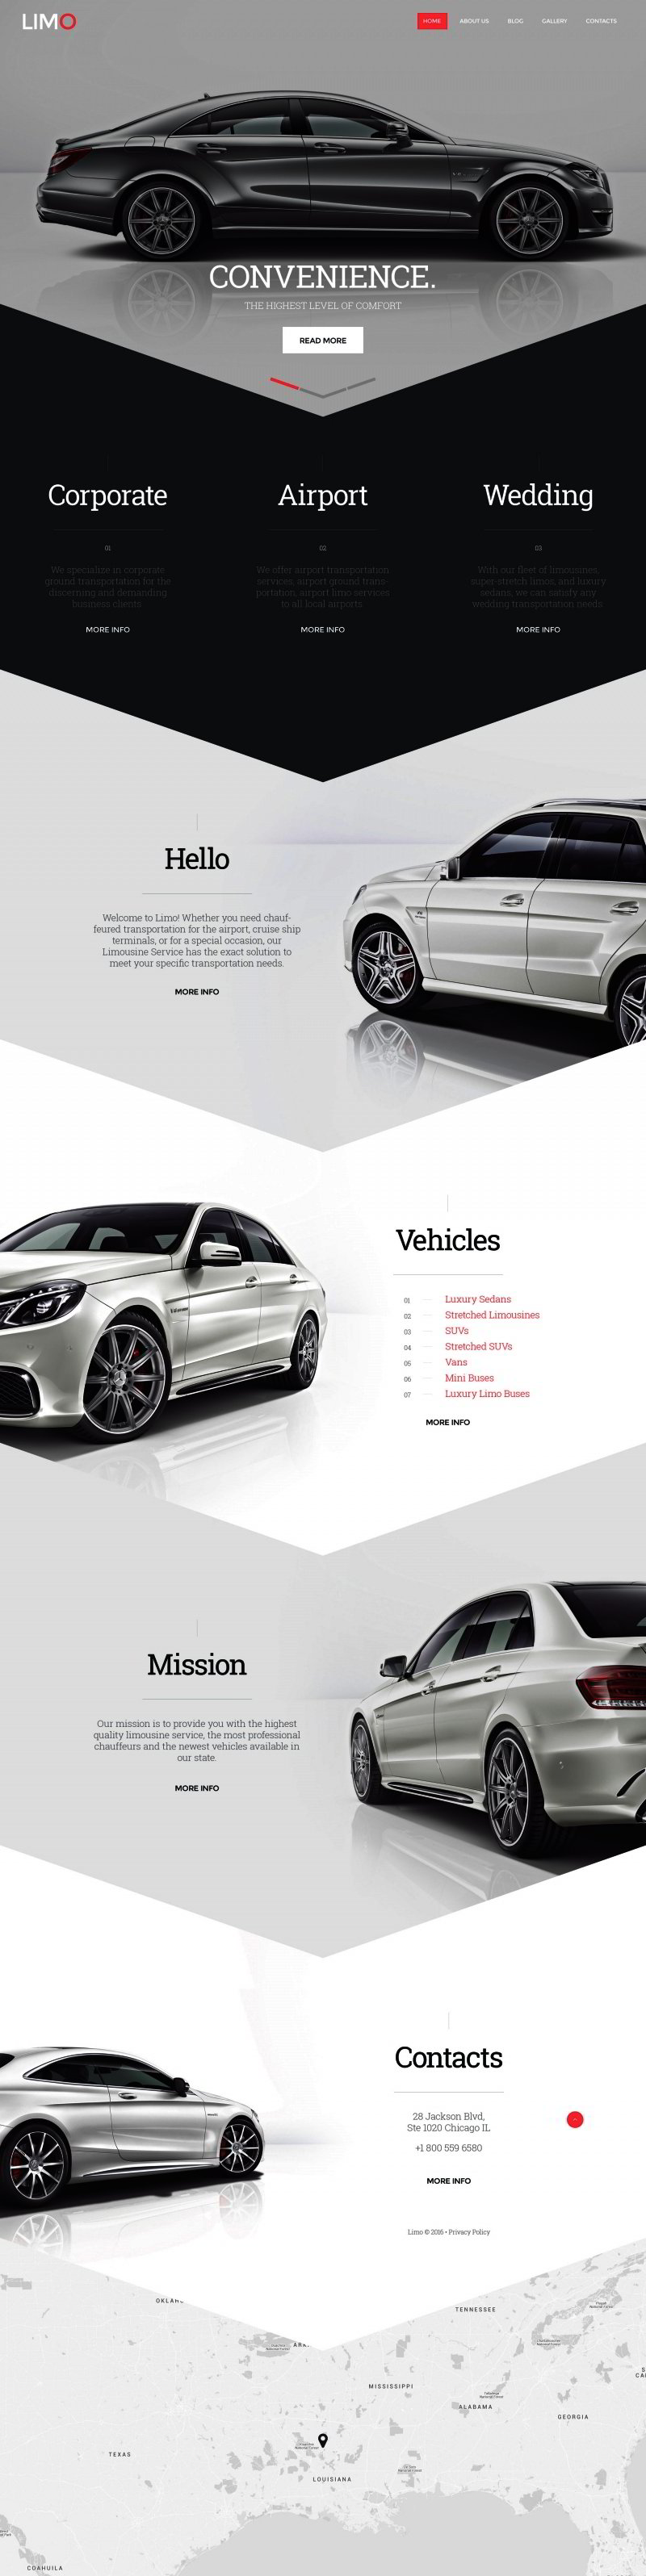 Limo Website Template